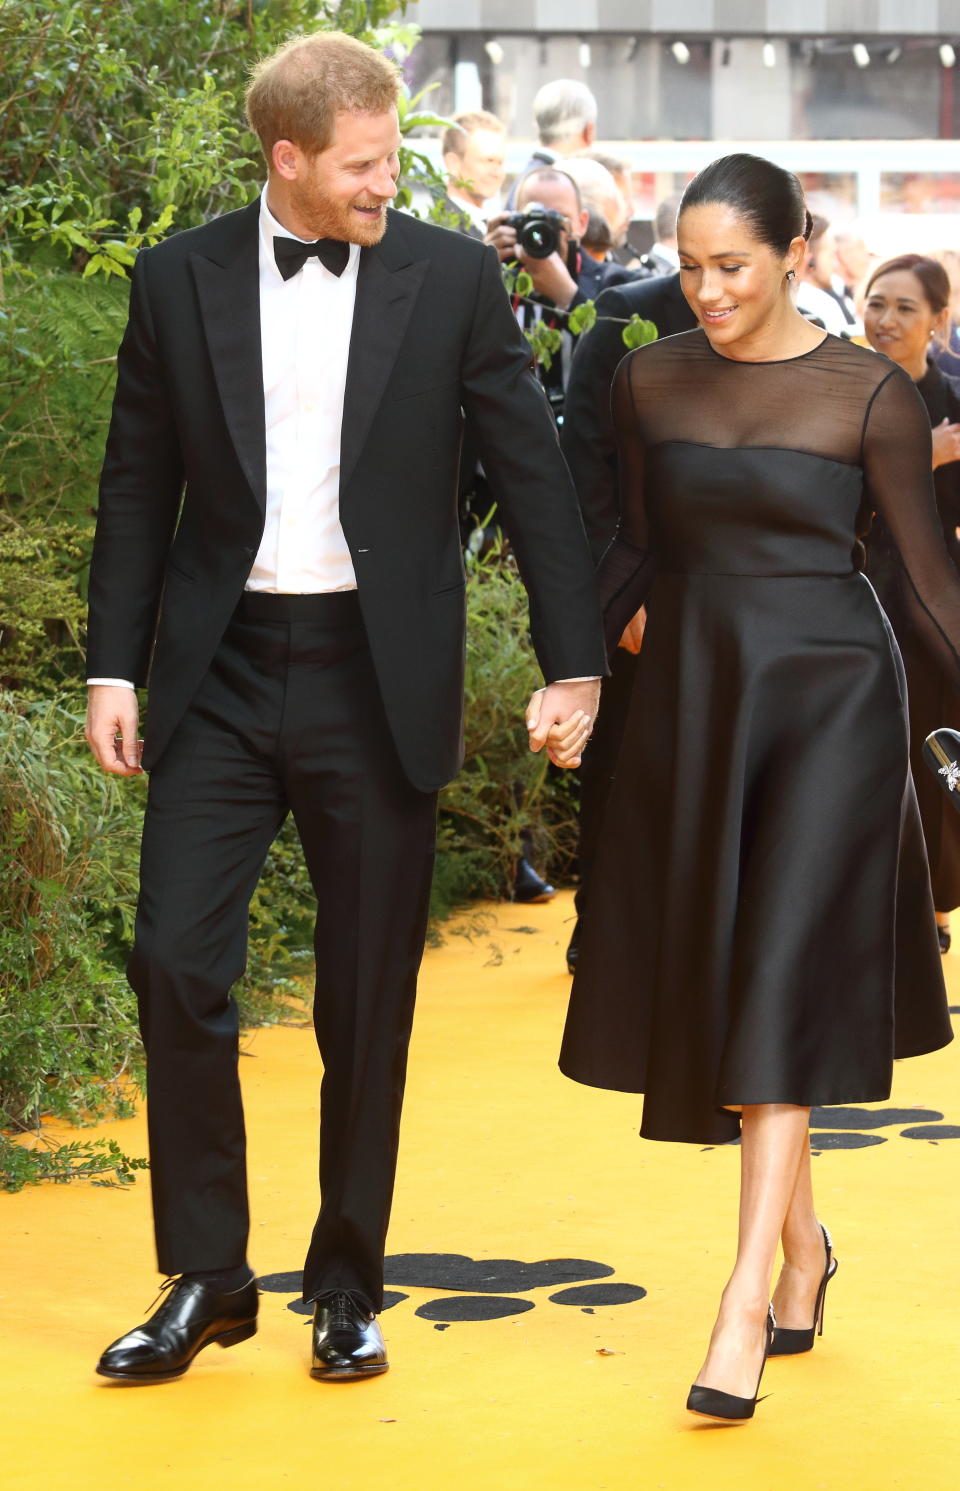 Prince Harry and Meghan Markle at the Lion King premiere